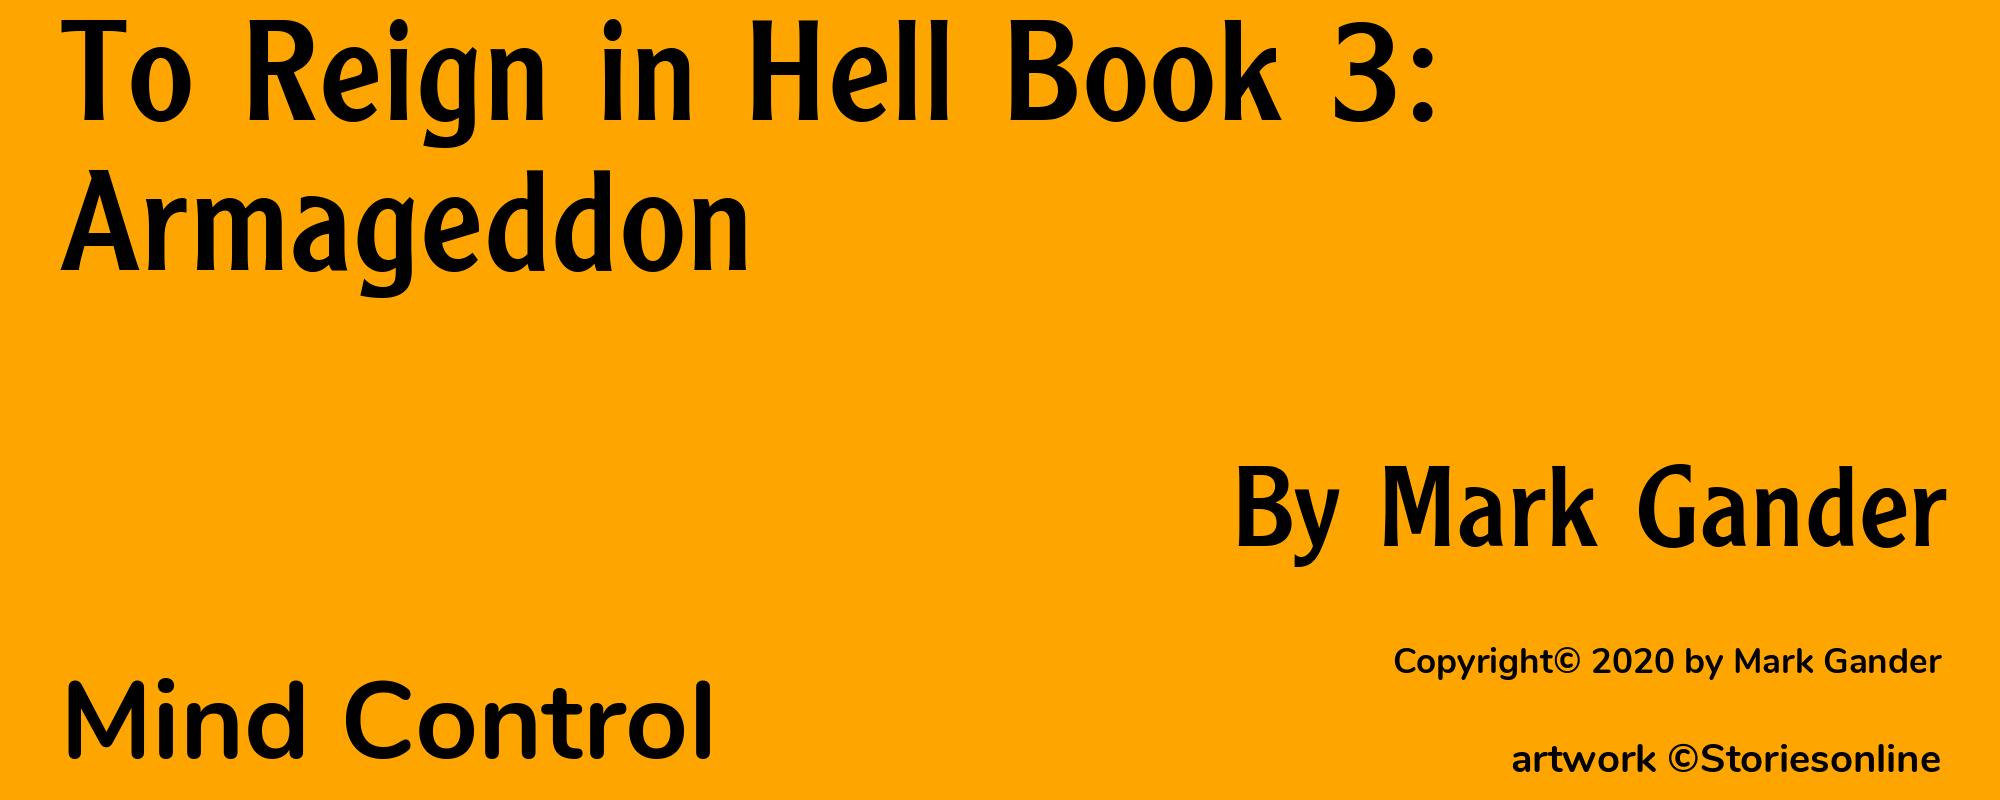 To Reign in Hell Book 3: Armageddon - Cover